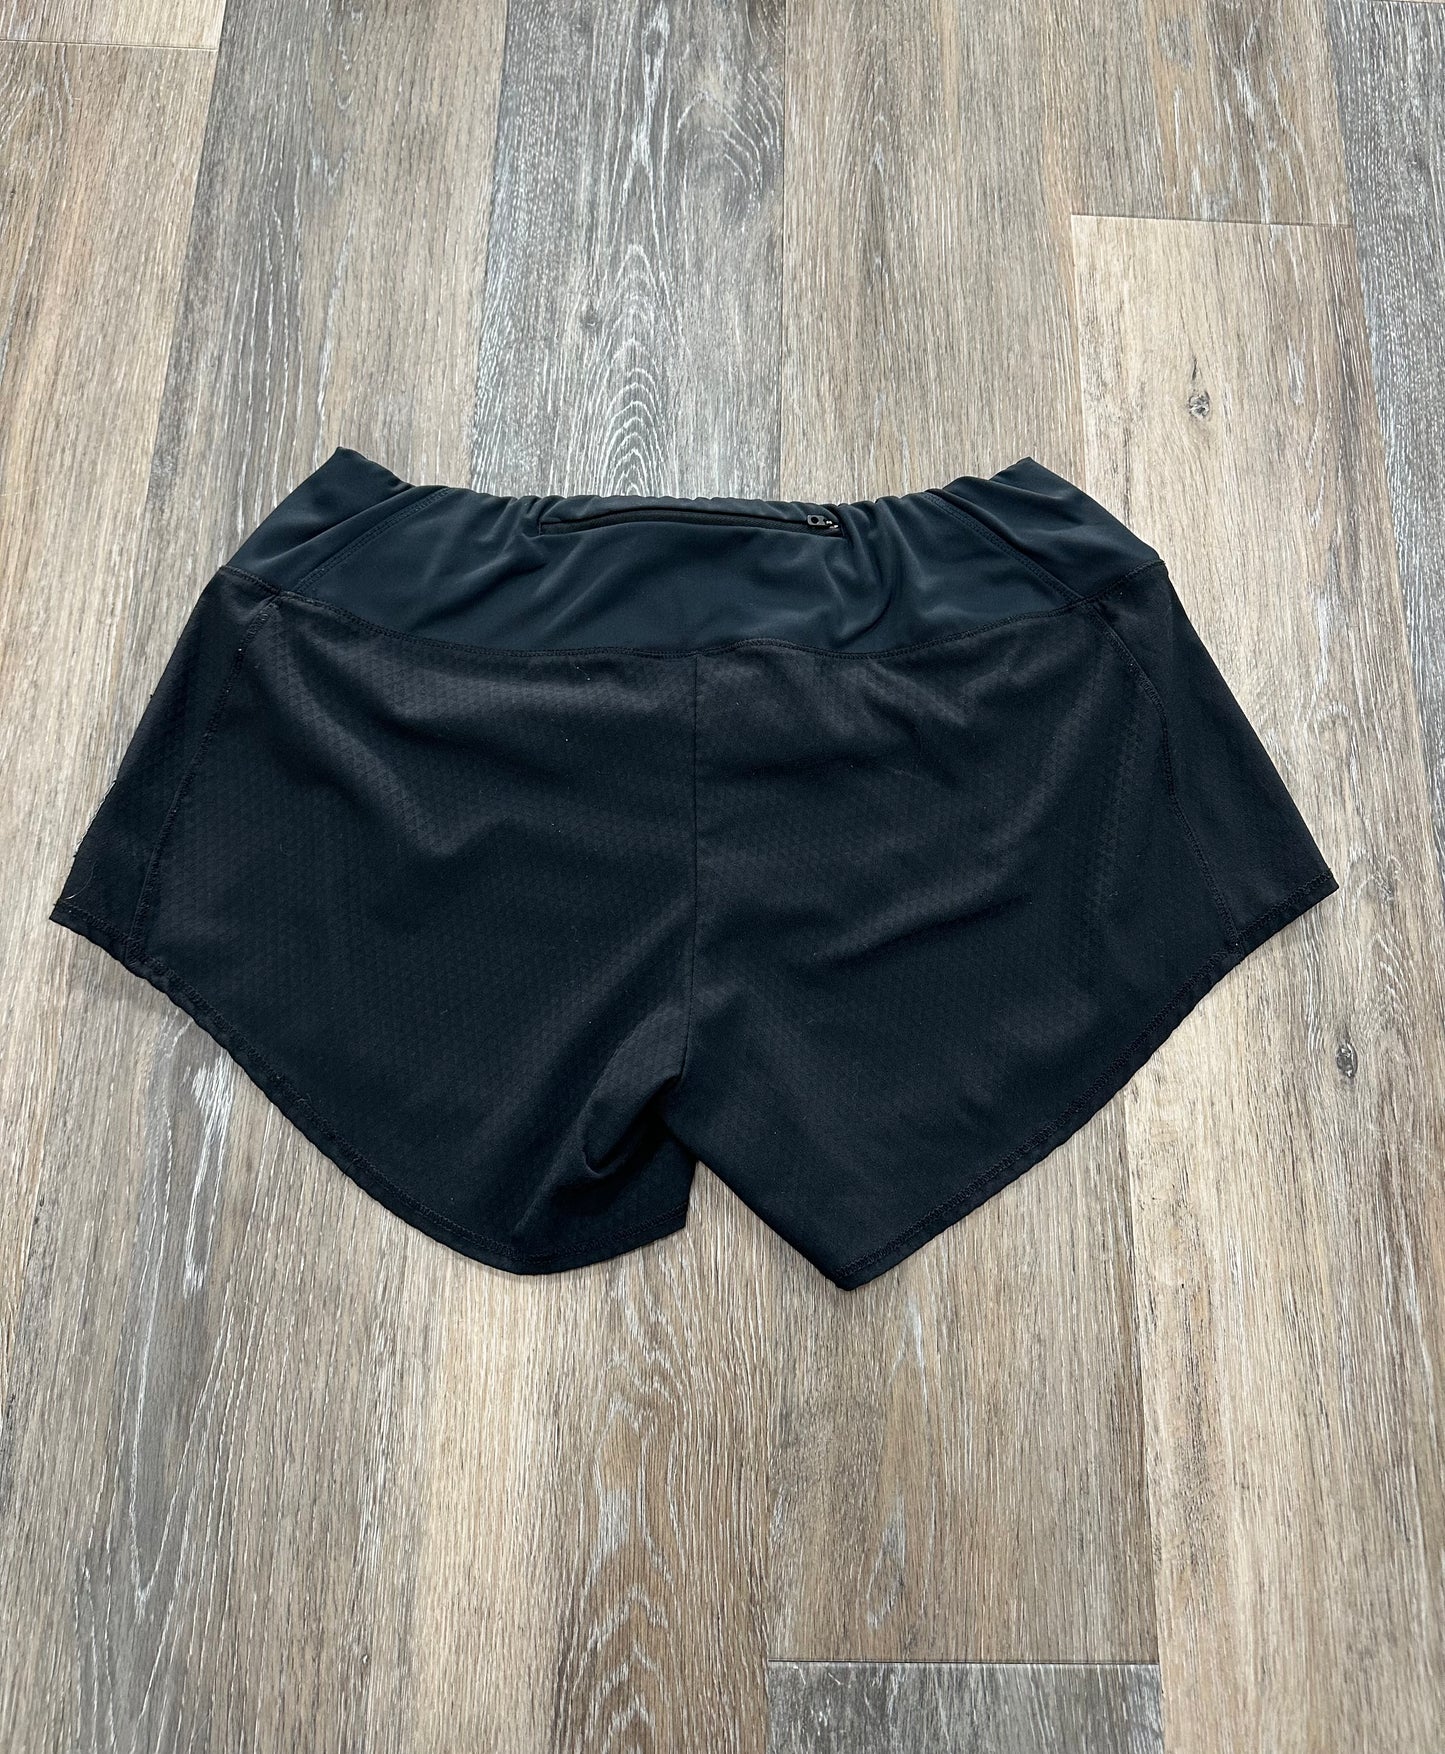 Shorts By Oiselle  Size: 8